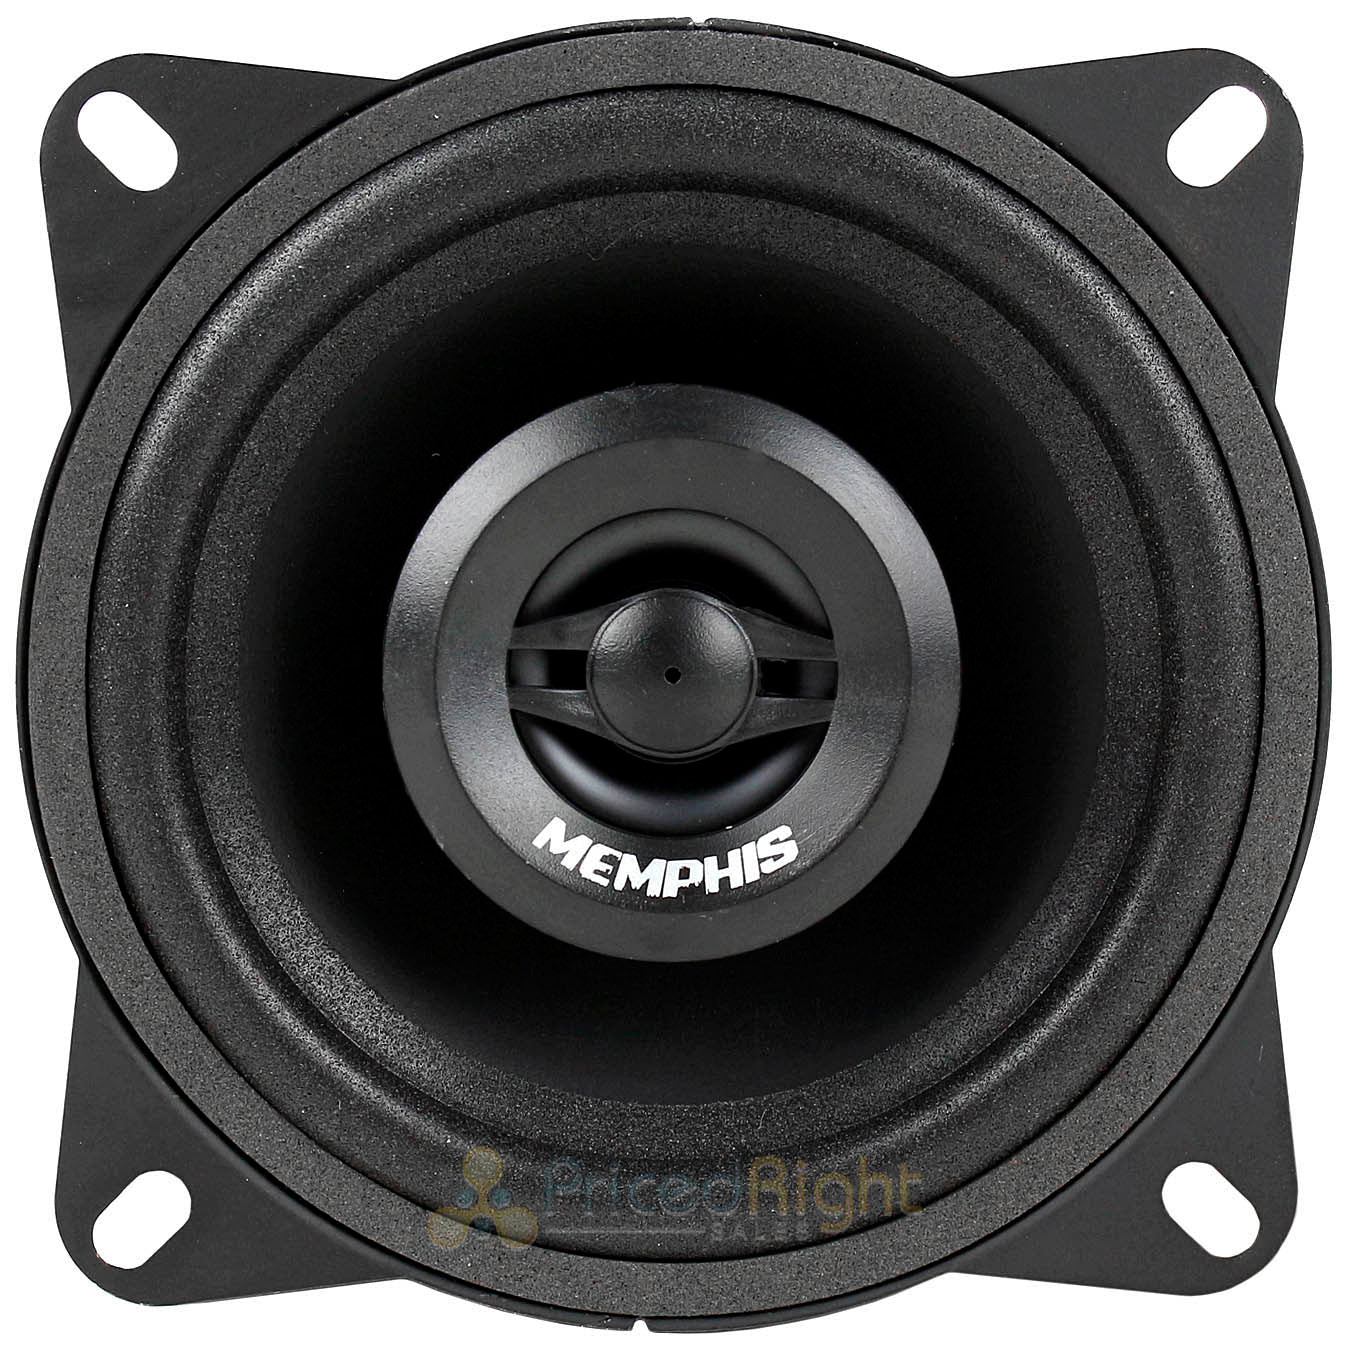 4 Memphis Audio 4" Inch 2 Way Coaxial Speakers 20W RMS Each Street Reference